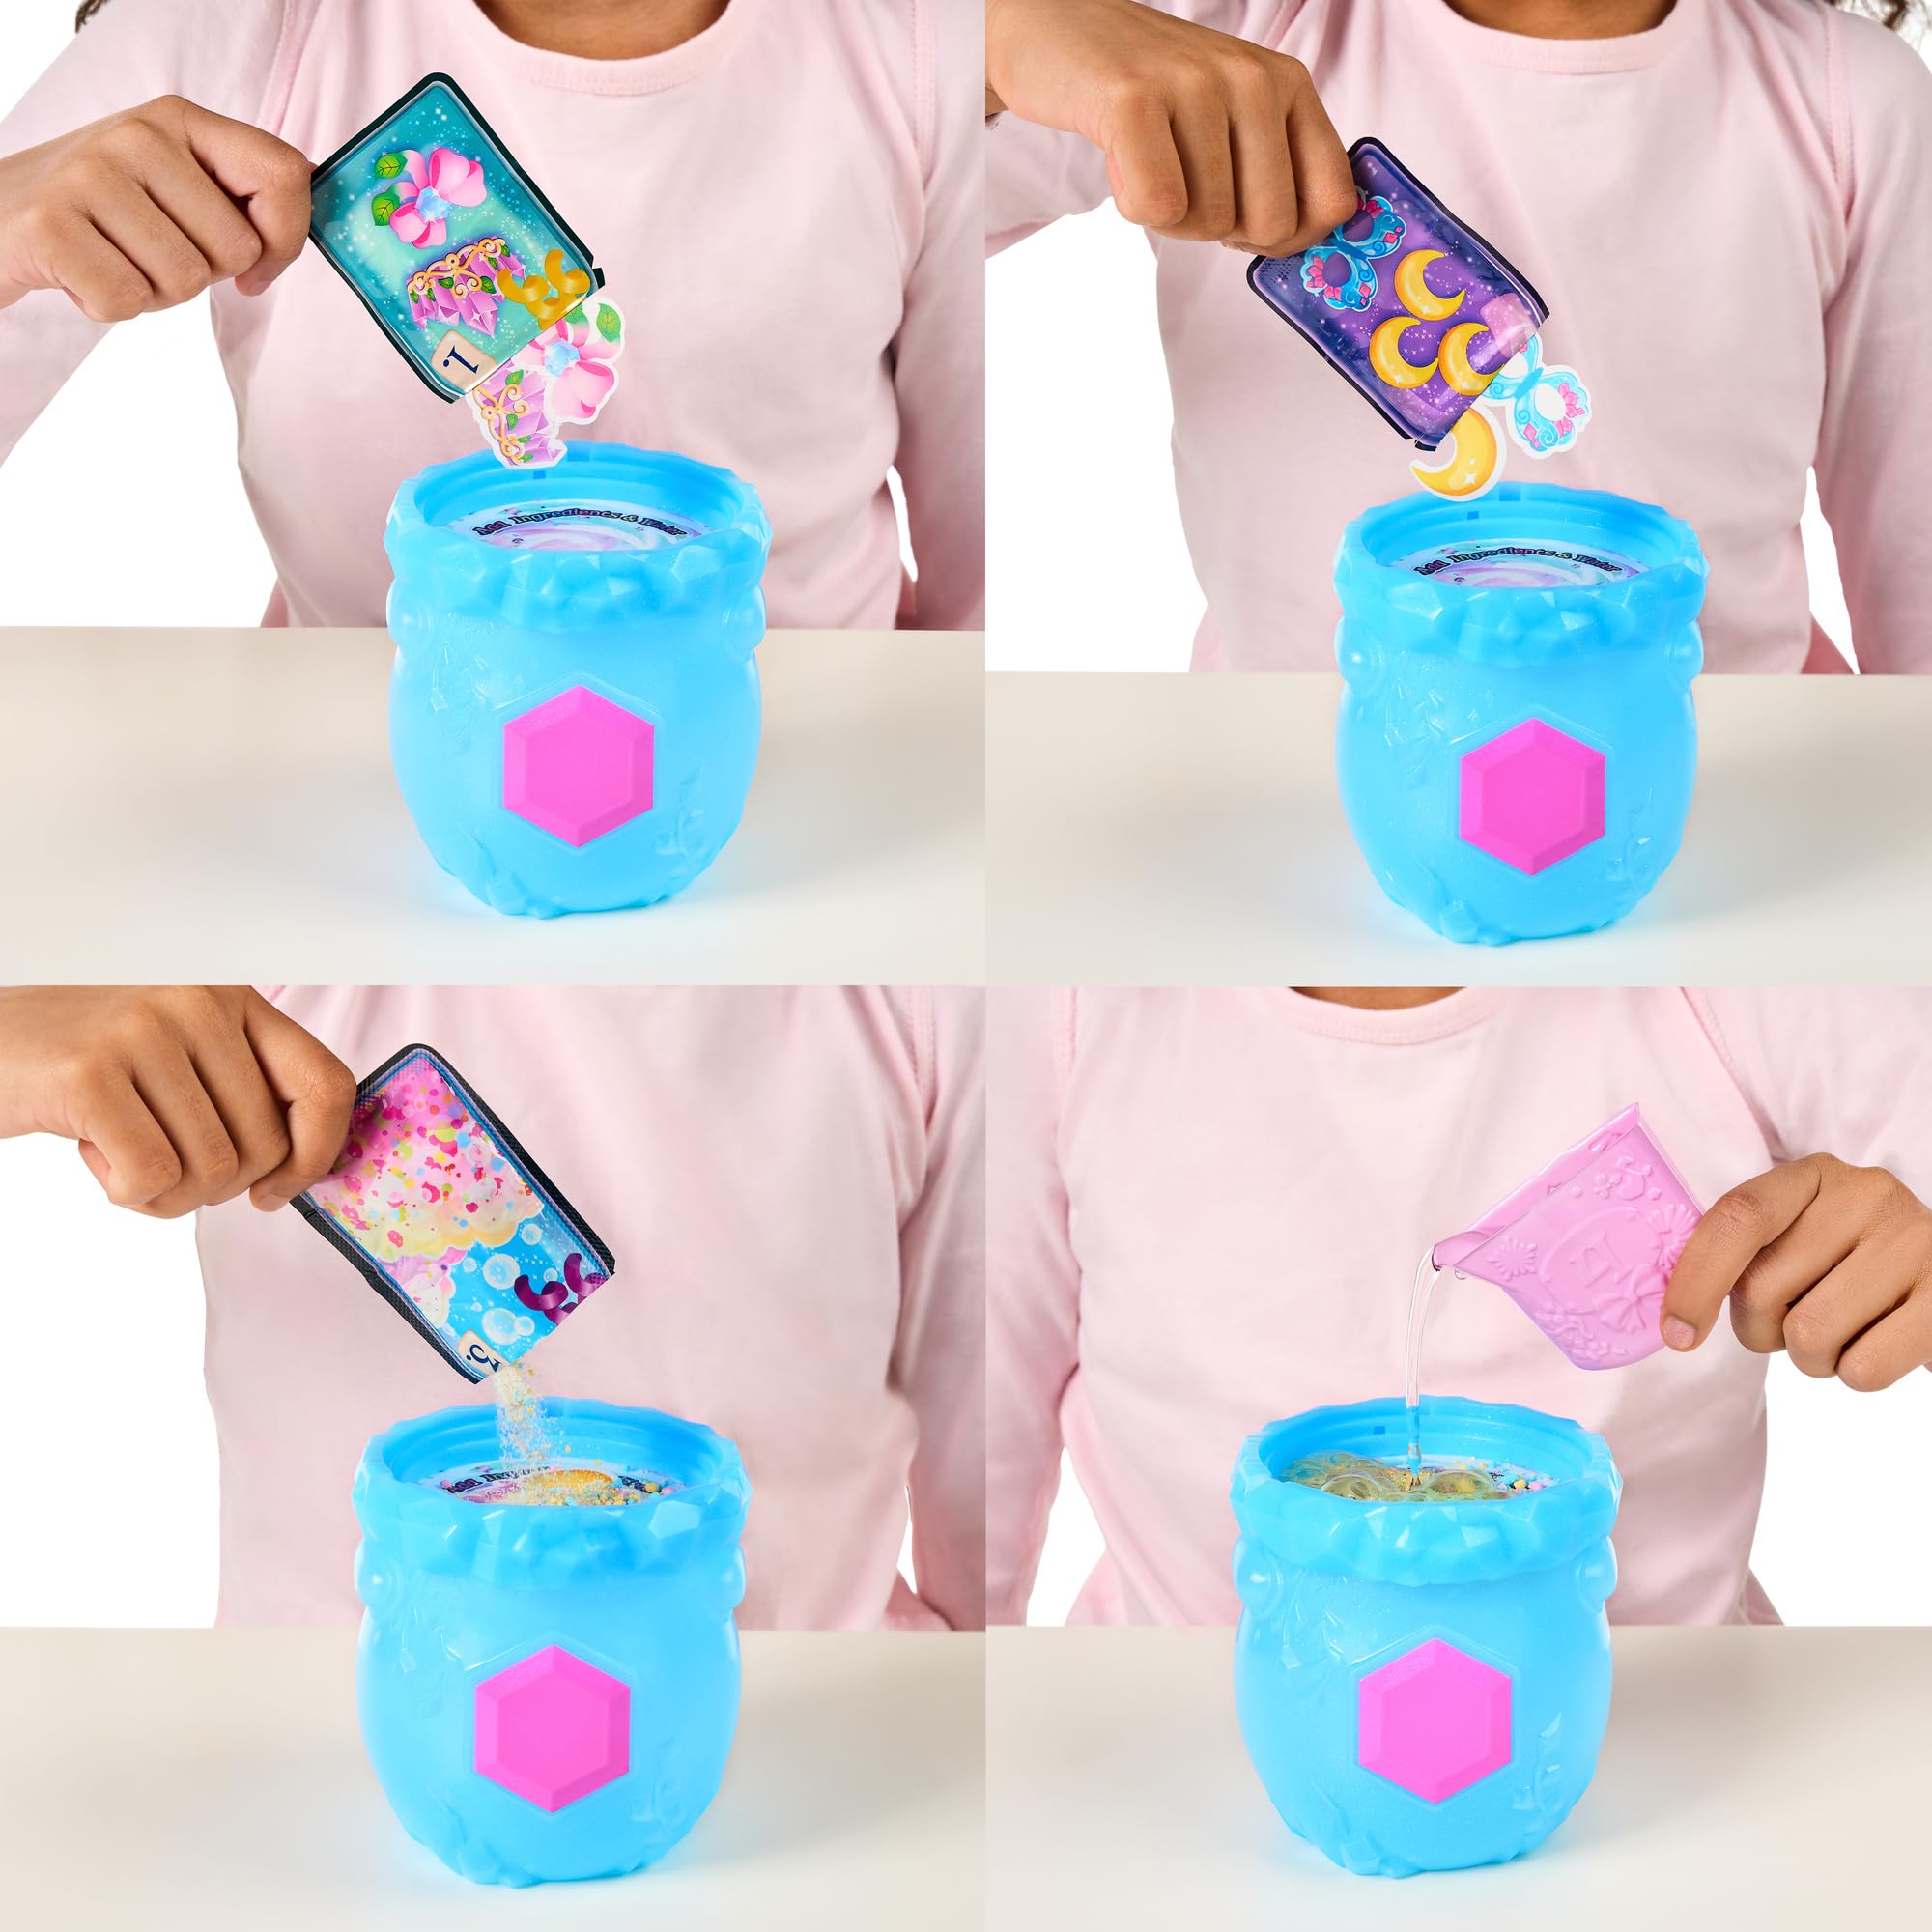 Magic Mixies Mixlings Magicus Party Fizz & Reveal 2 Pack Cauldron | with Magical Confetti Fizz Unboxing | 4 New Magicus Party Mixling Powers to Discover | 30+ to Collect